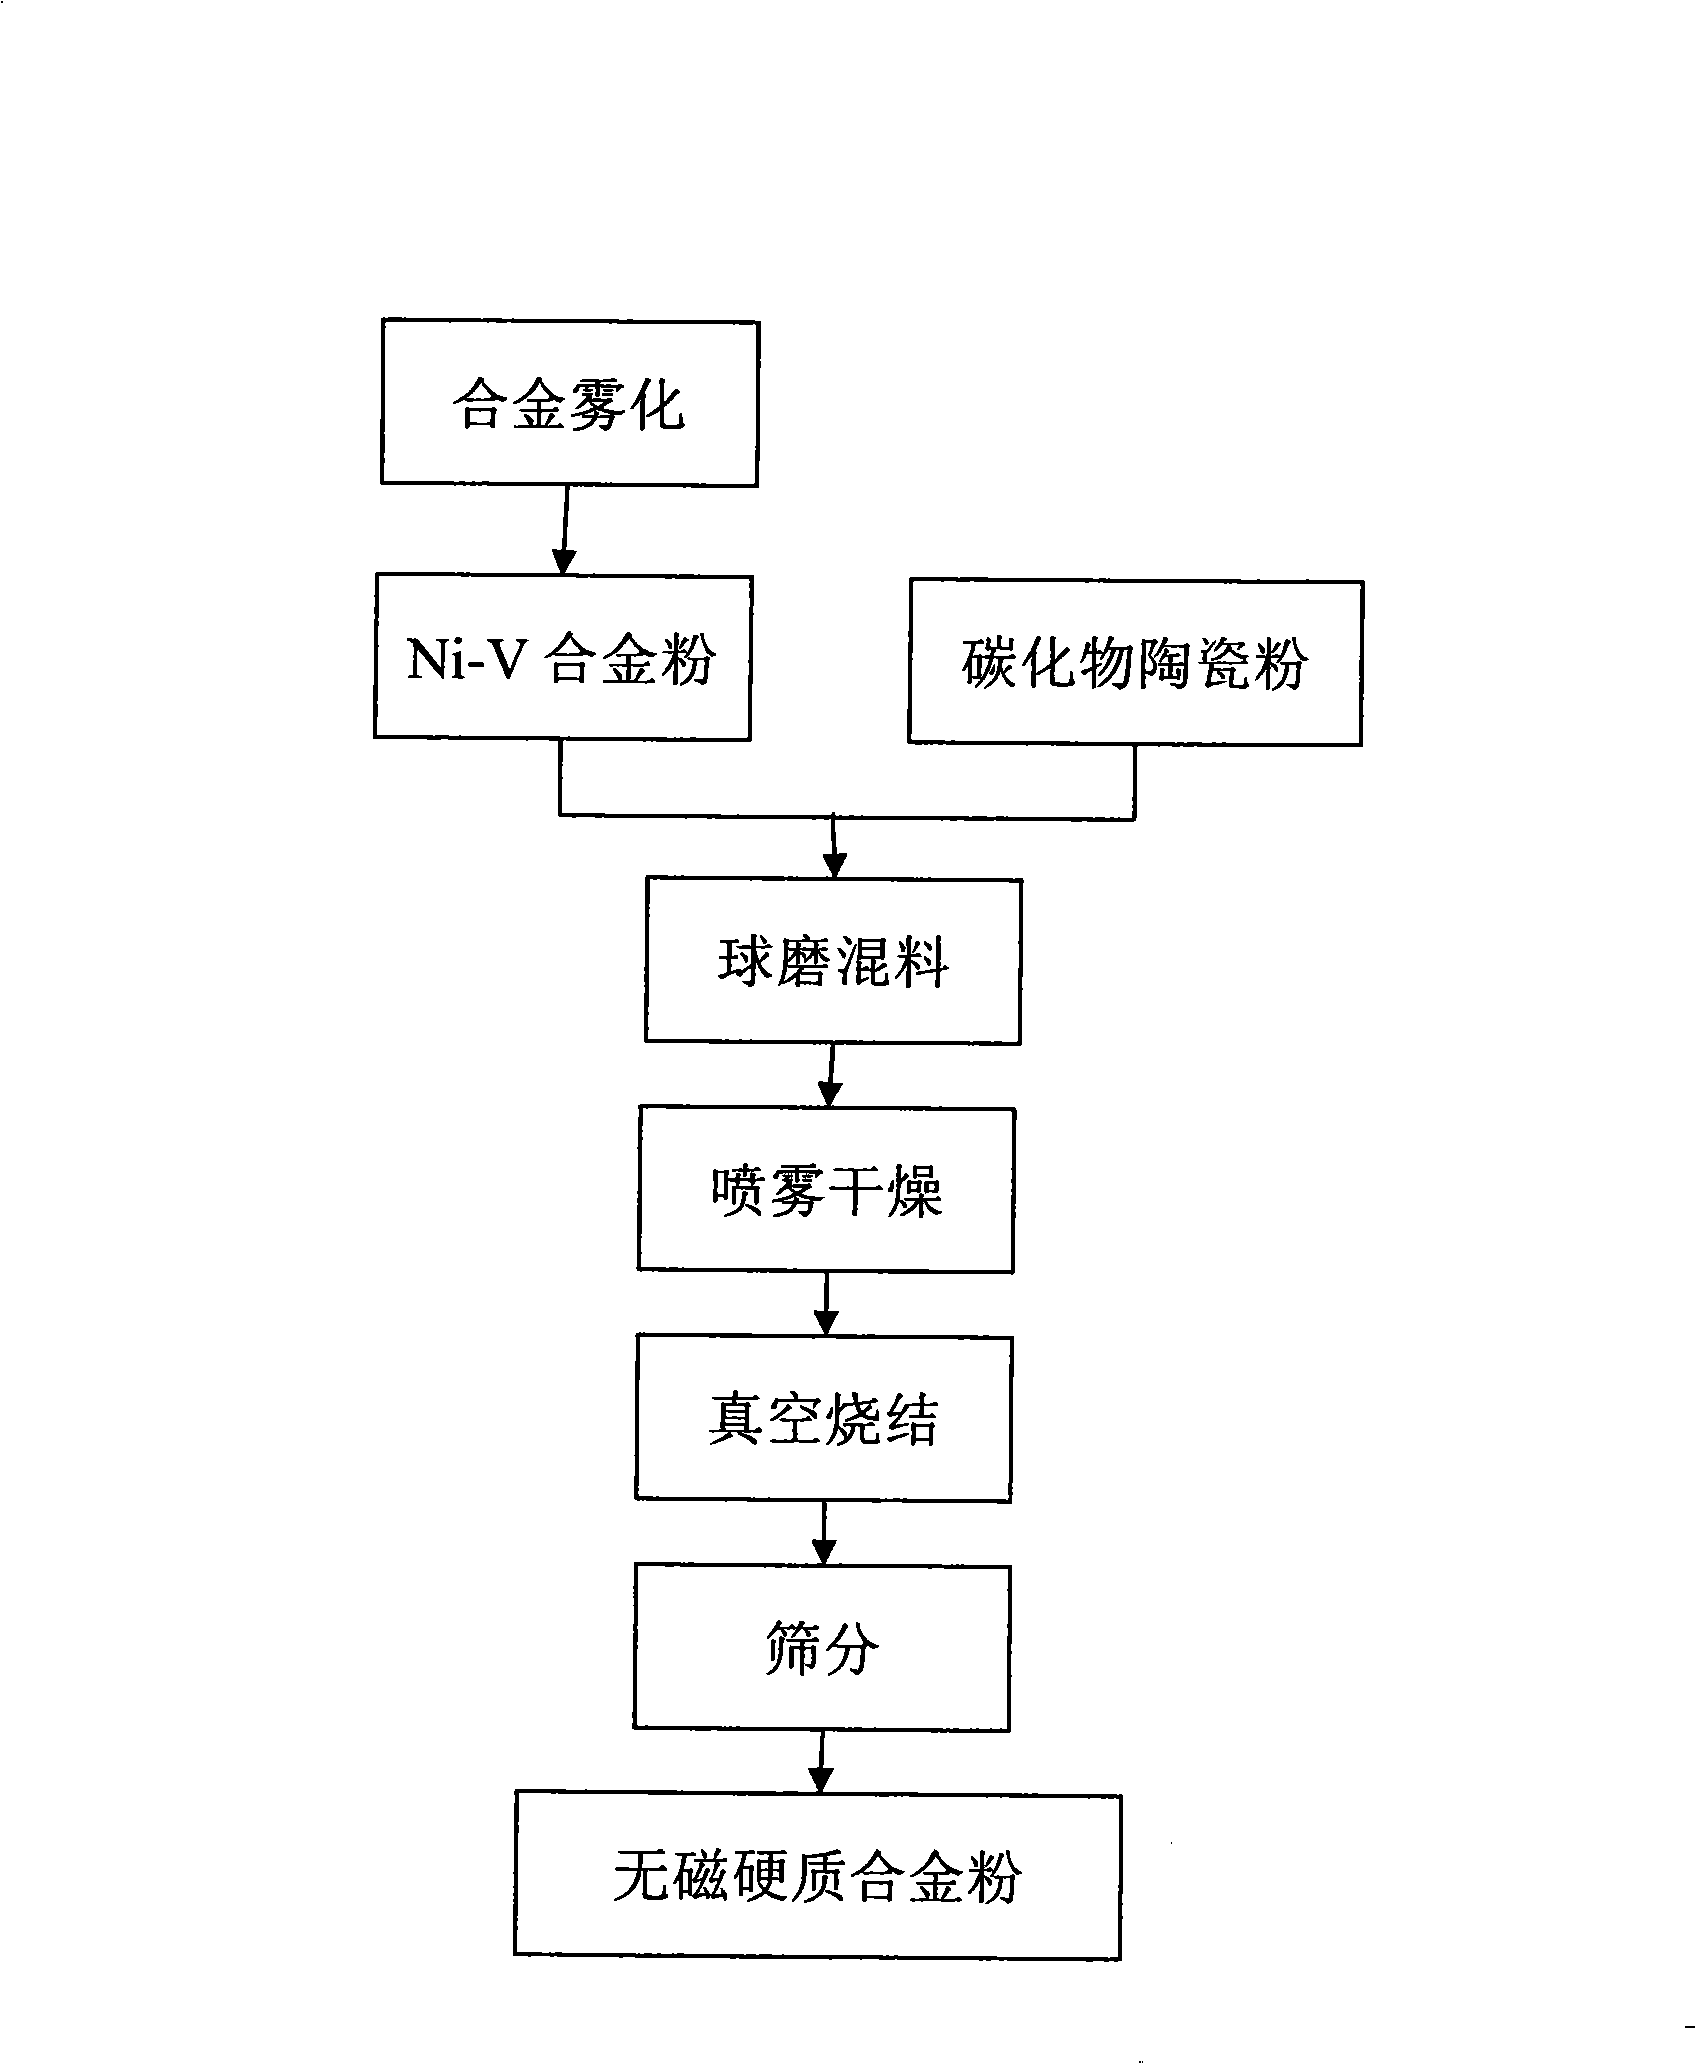 Non magnetic cemented carbide powder with nickel-vanadium alloys as binder phase and preparation